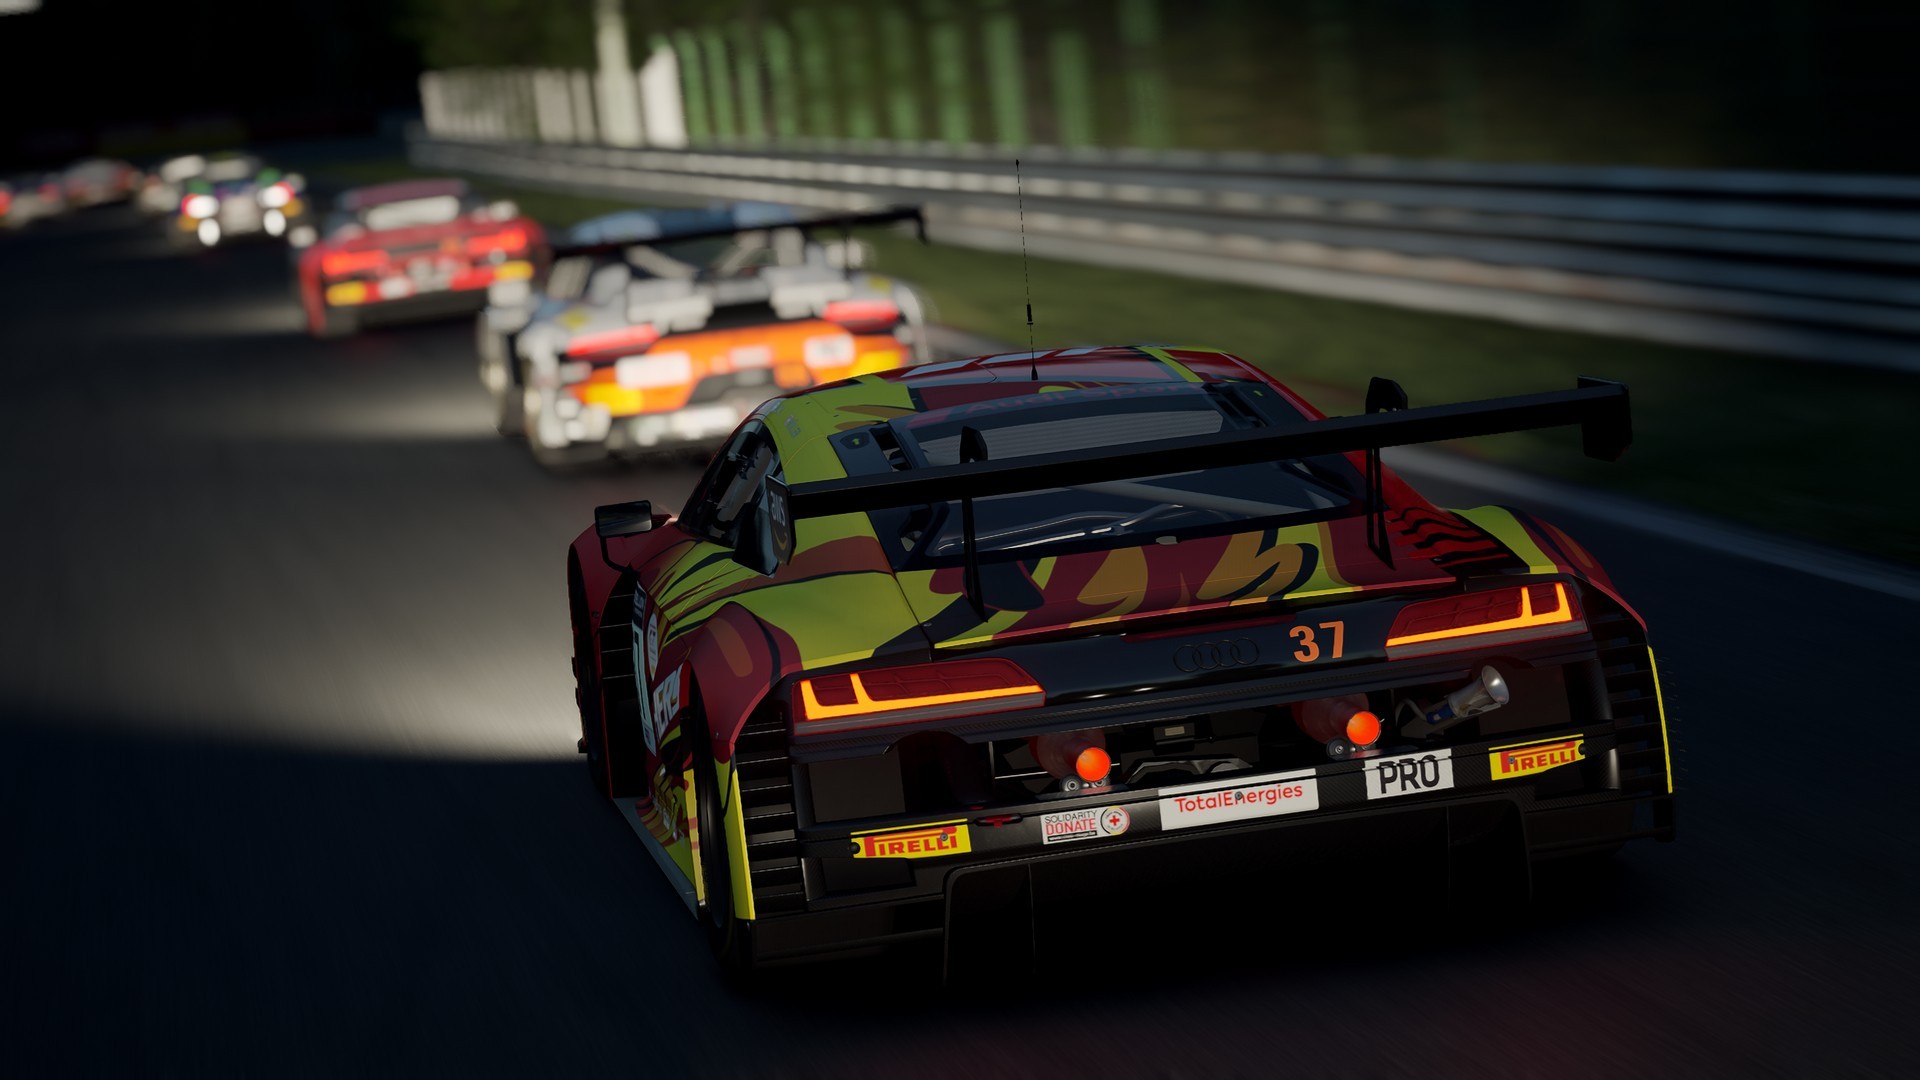 Racing Sim Assetto Corsa Competizione Finally Arrives on PS5 and